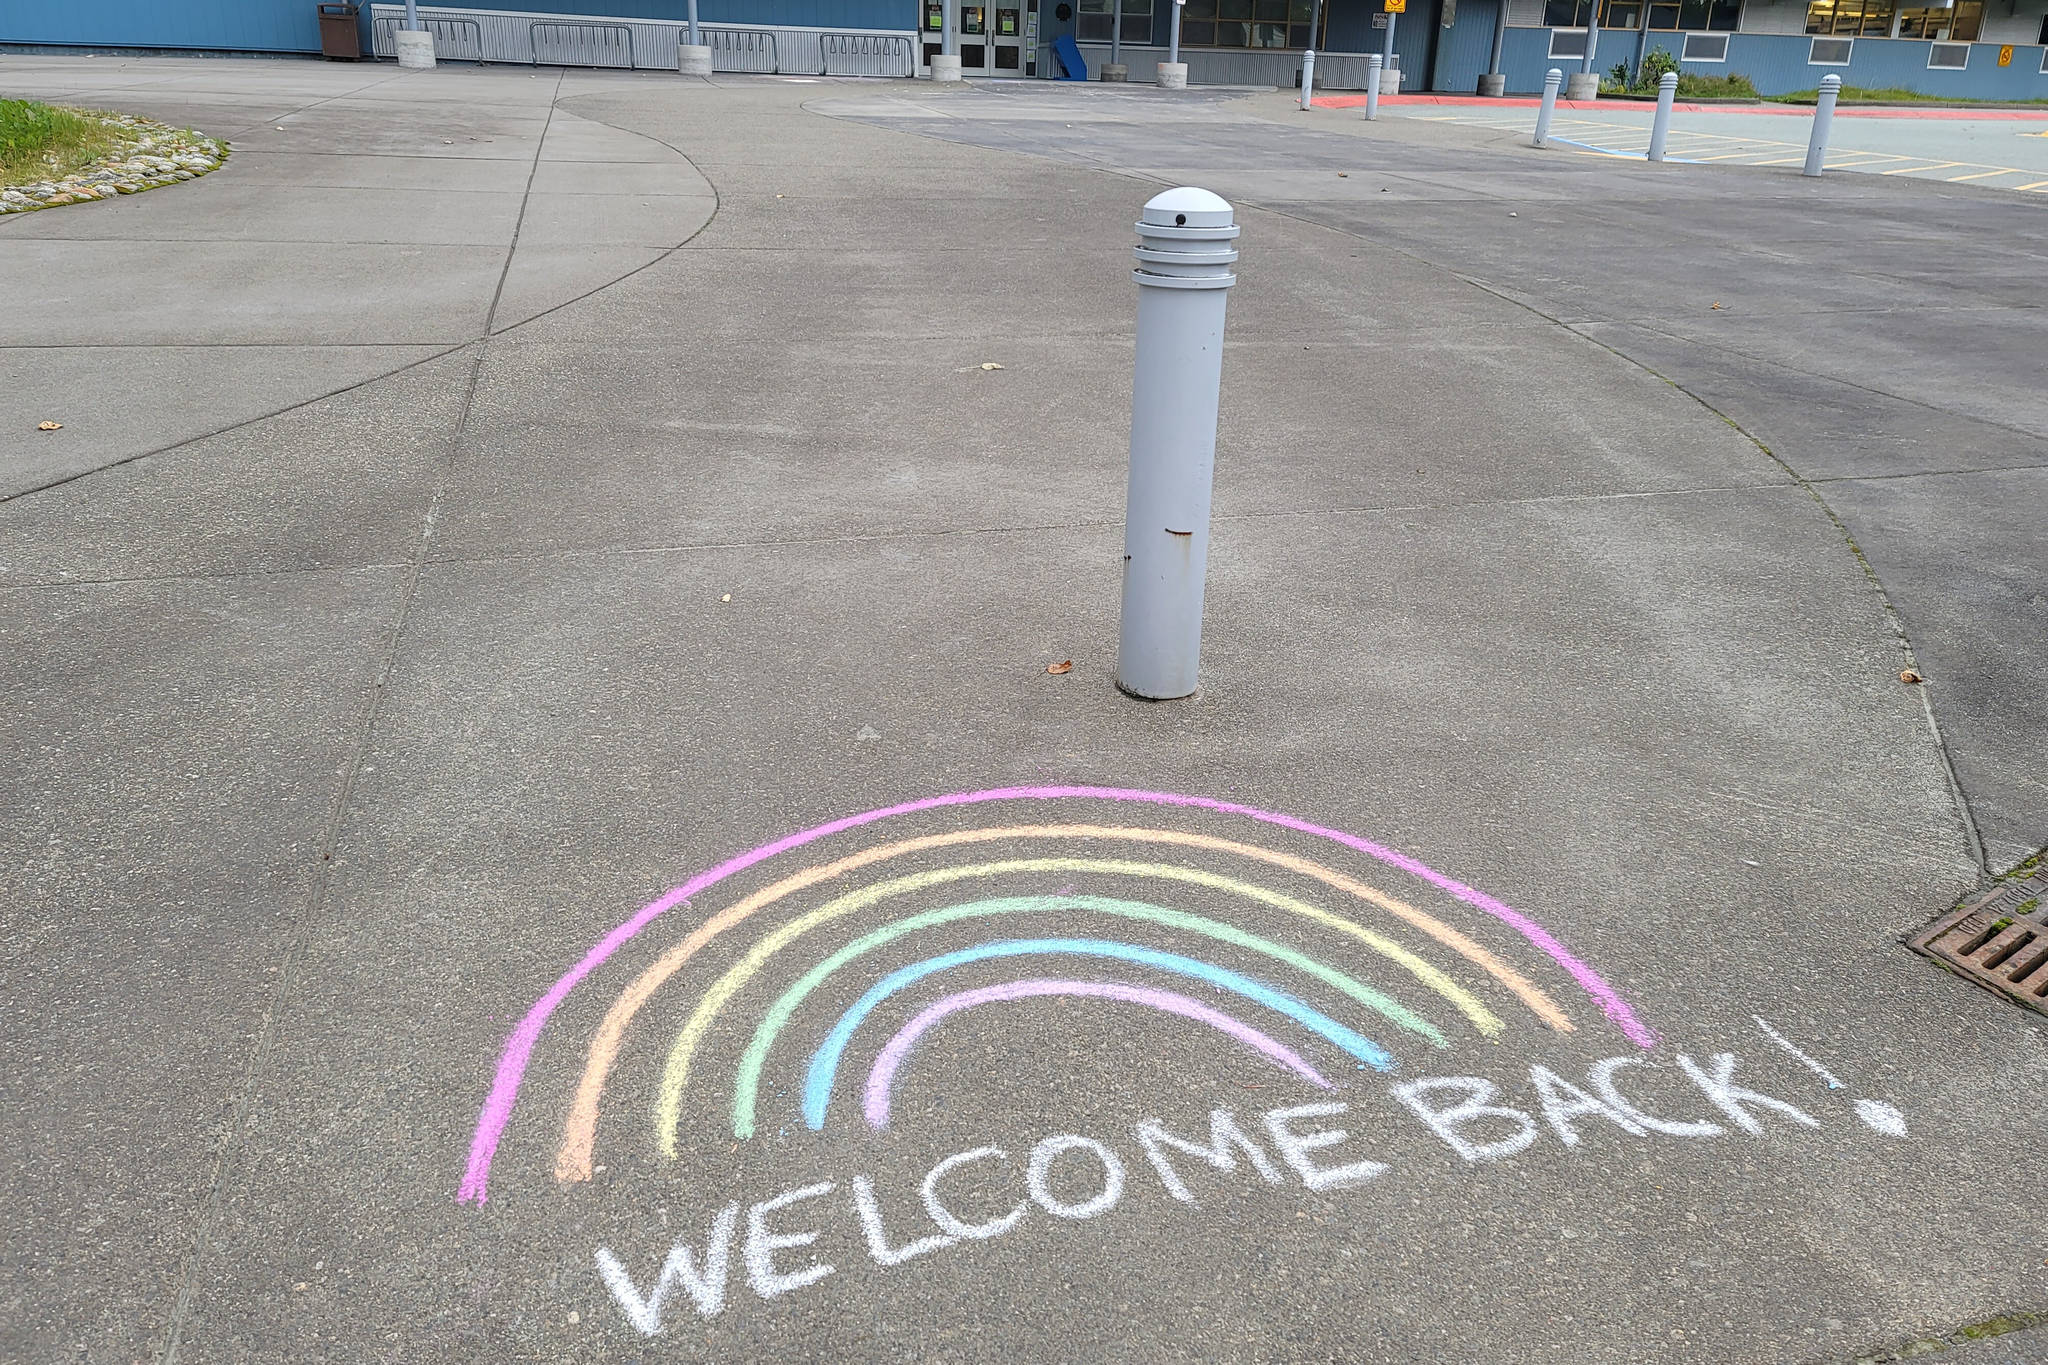 A sidewalk-based message welcomes students and staff back to Sít’ Eetí Shaanàx-Glacier Valley School ahead of the first day of school on Monday, Aug. 16.